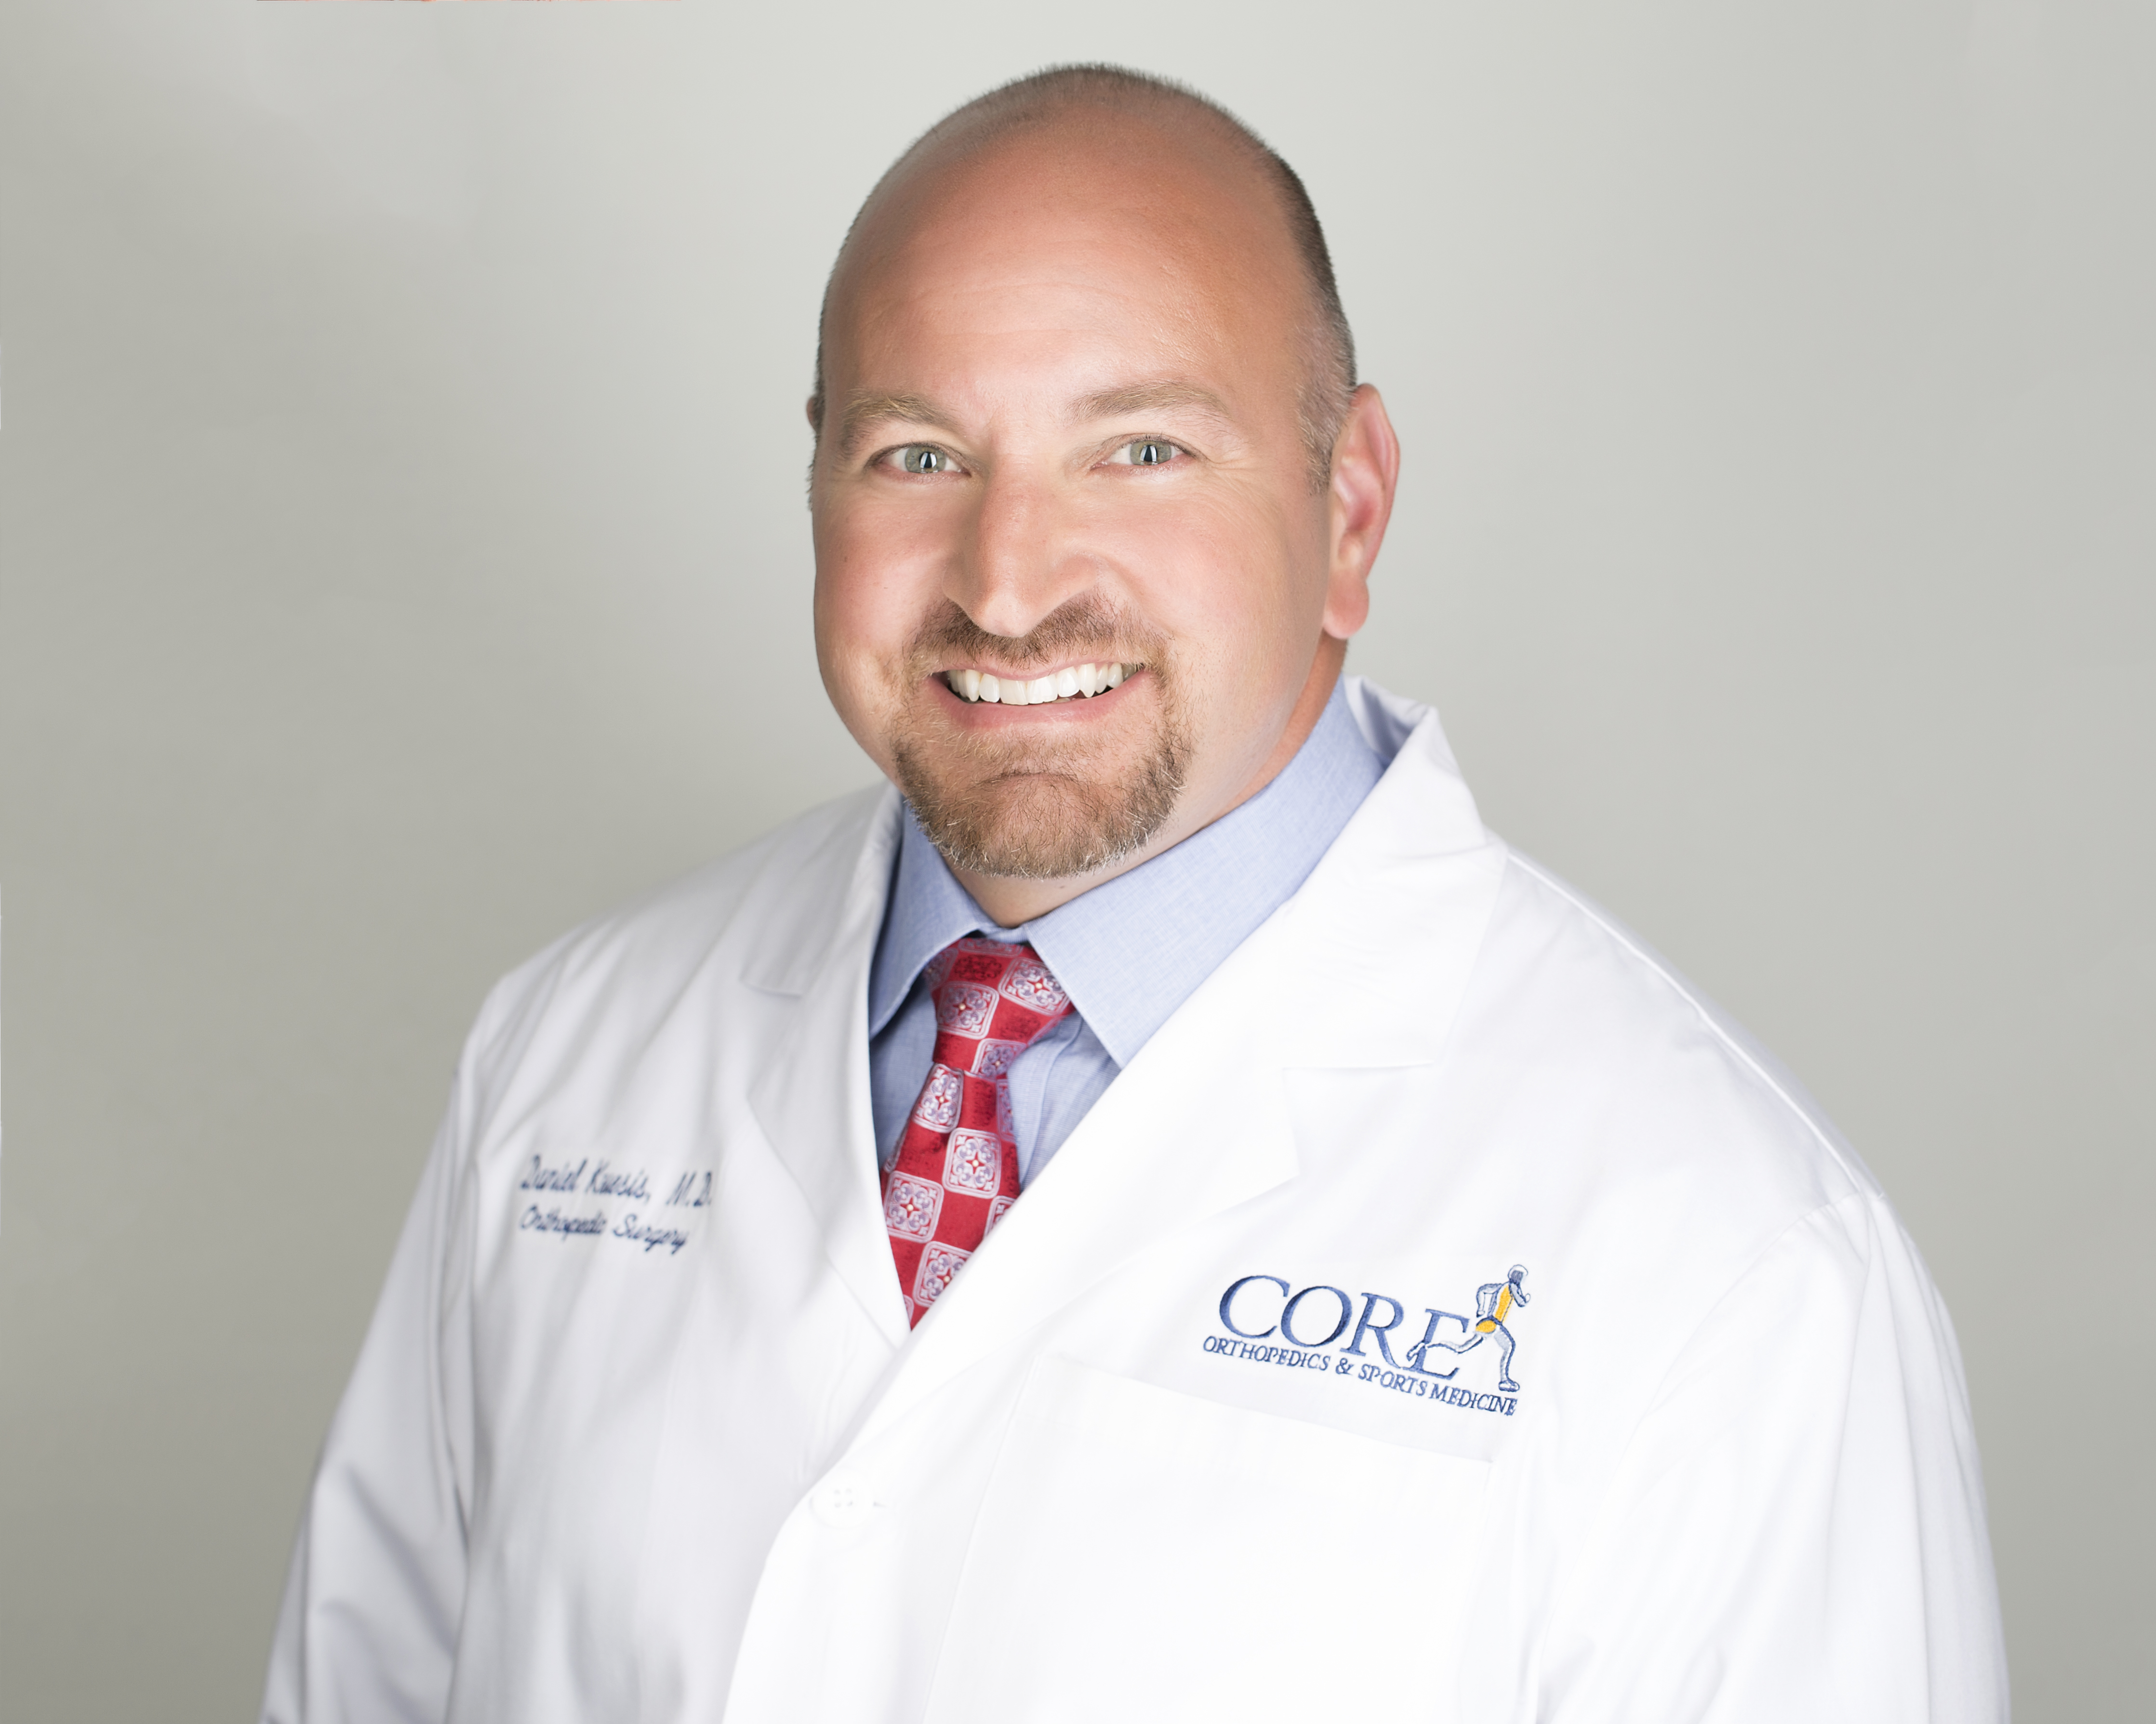 Physical Therapy and Orthopedic Specialist - Coreorthosports